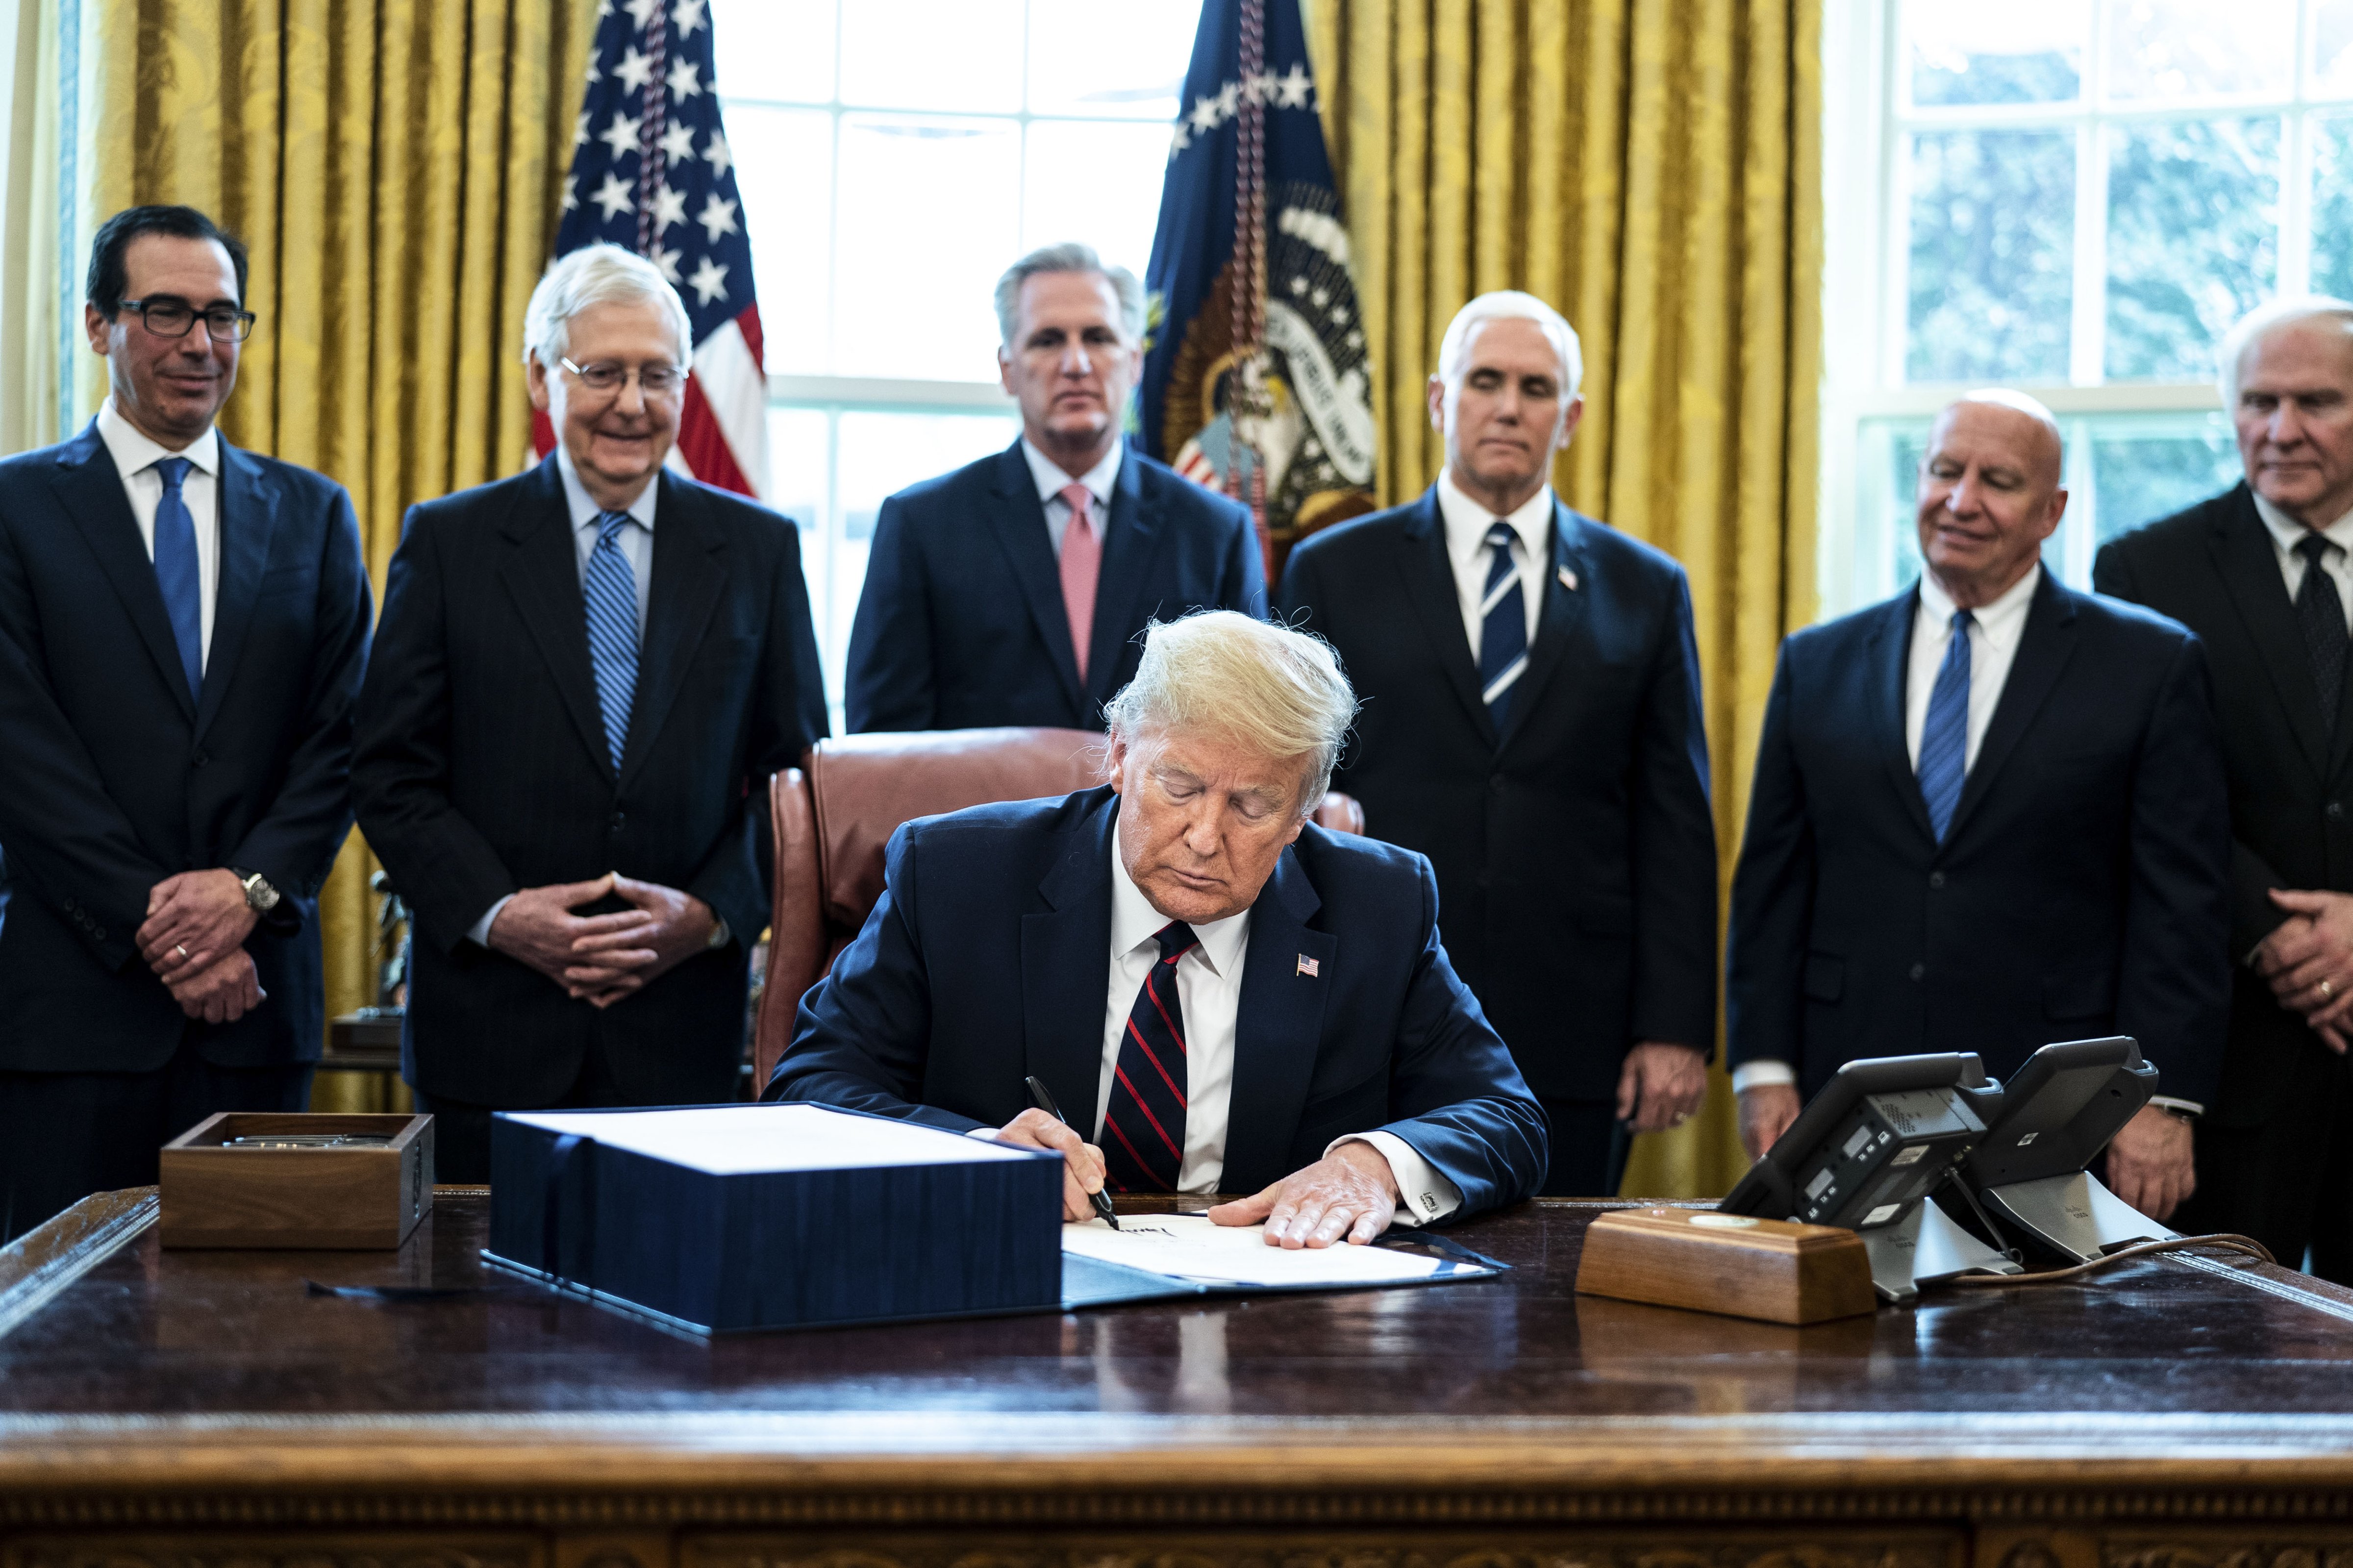 President Donald Trump signs the Coronavirus Aid, Relief, and Economic Security (CARES) Act, in the Oval Office of the White House in Washington, D.C., on Friday, March 27, 2020. (Erin Schaff—The New York Times/Bloomberg/Getty Images)